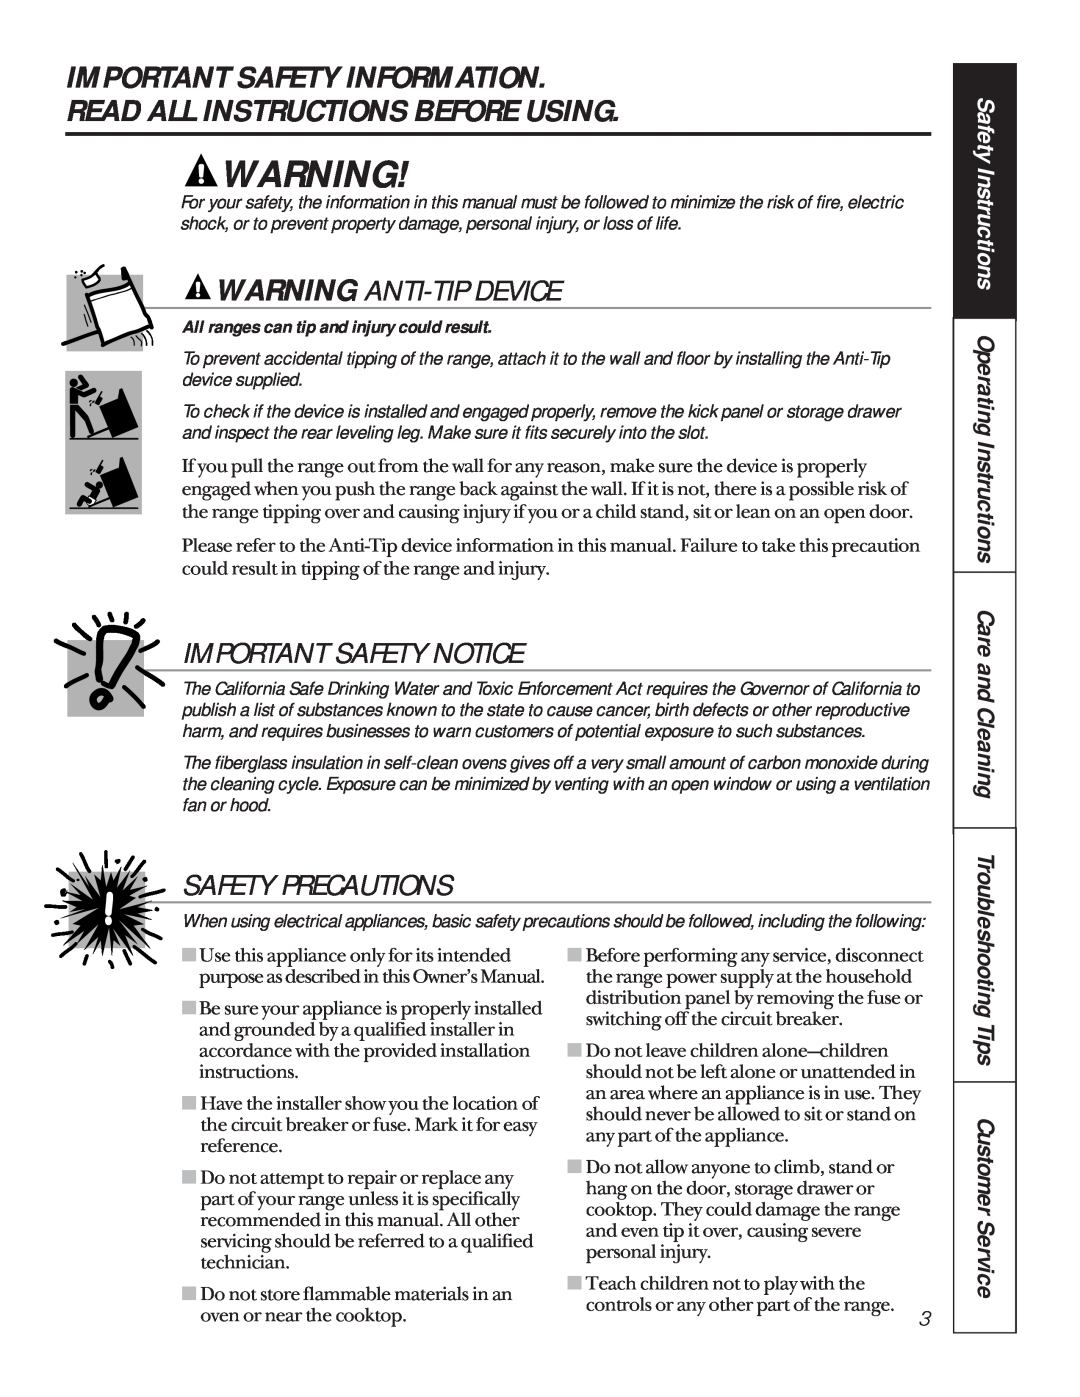 Hotpoint LEB326, LEB327, LEB316 Important Safety Information, Read All Instructions Before Using, Warning Anti-Tipdevice 